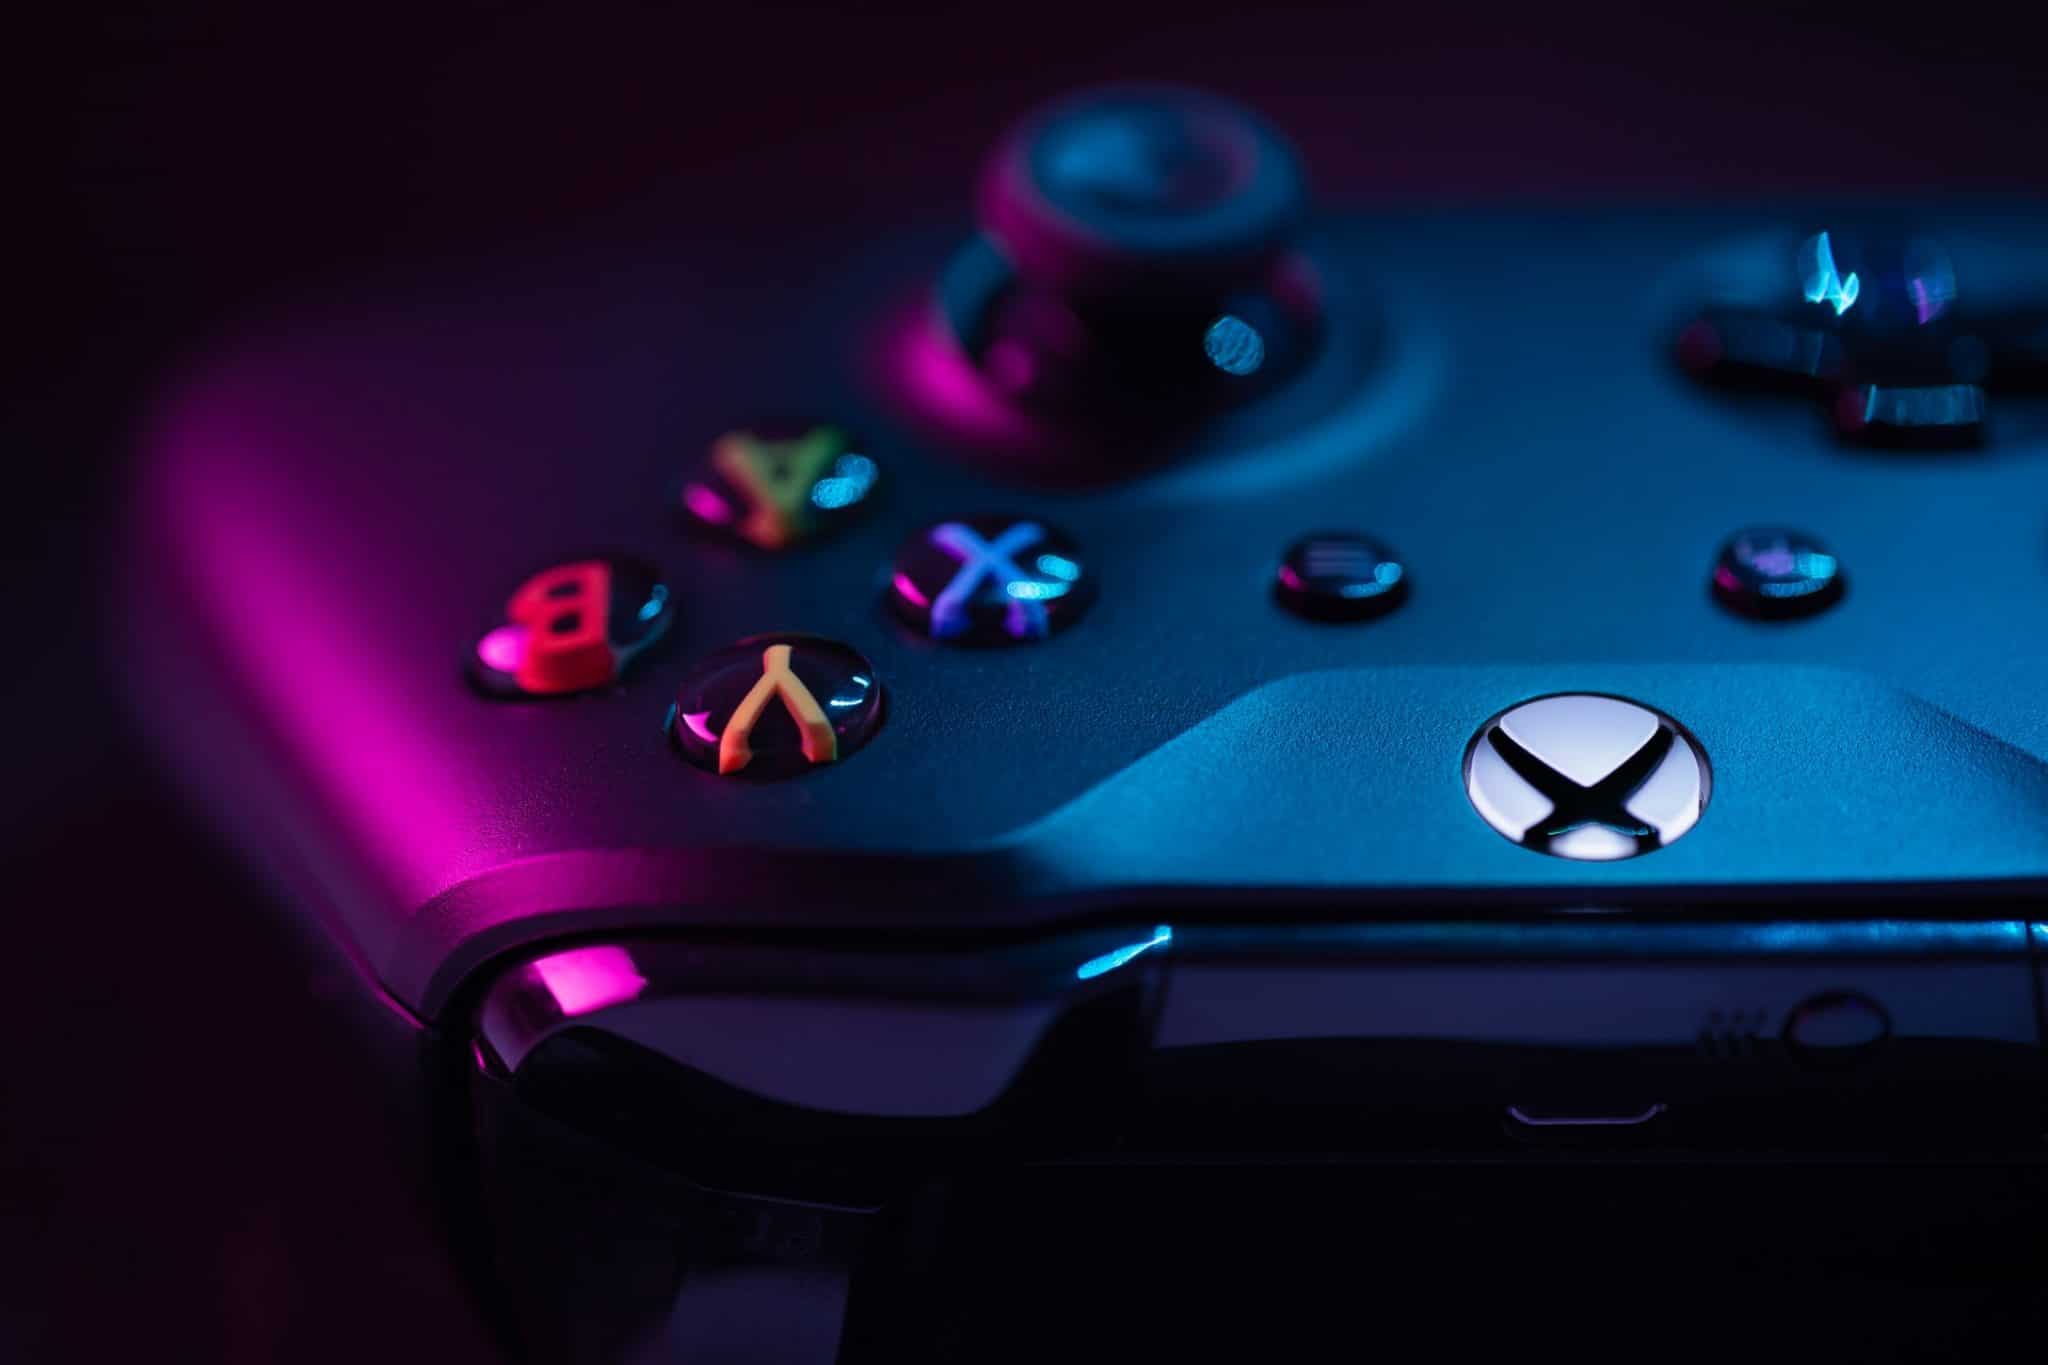 21 Xbox Statistics to Hype up Your Inner Gamer in 2023